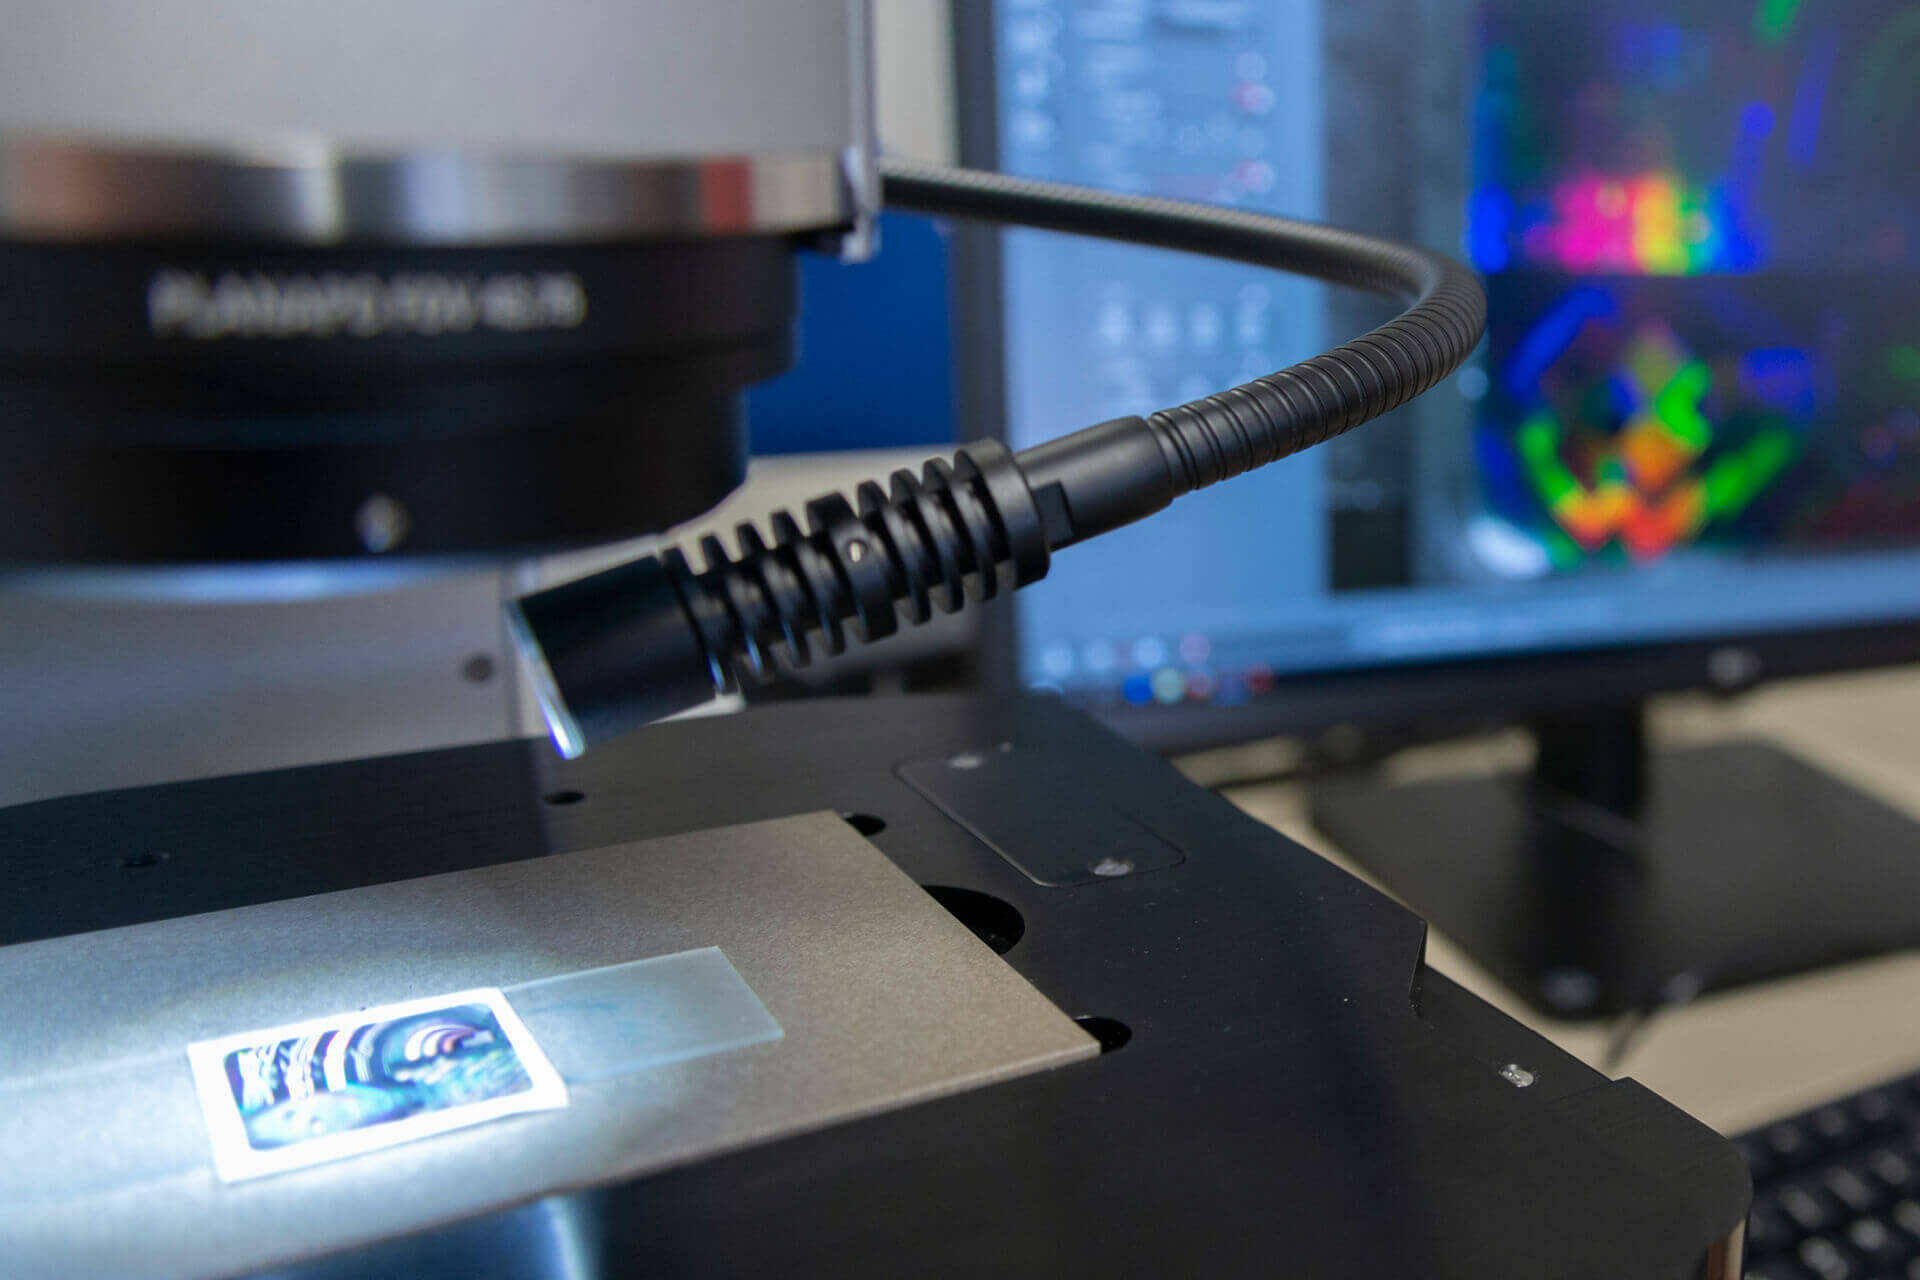 High-resolution digital microscopes enable surface investigations in the nanometer range.